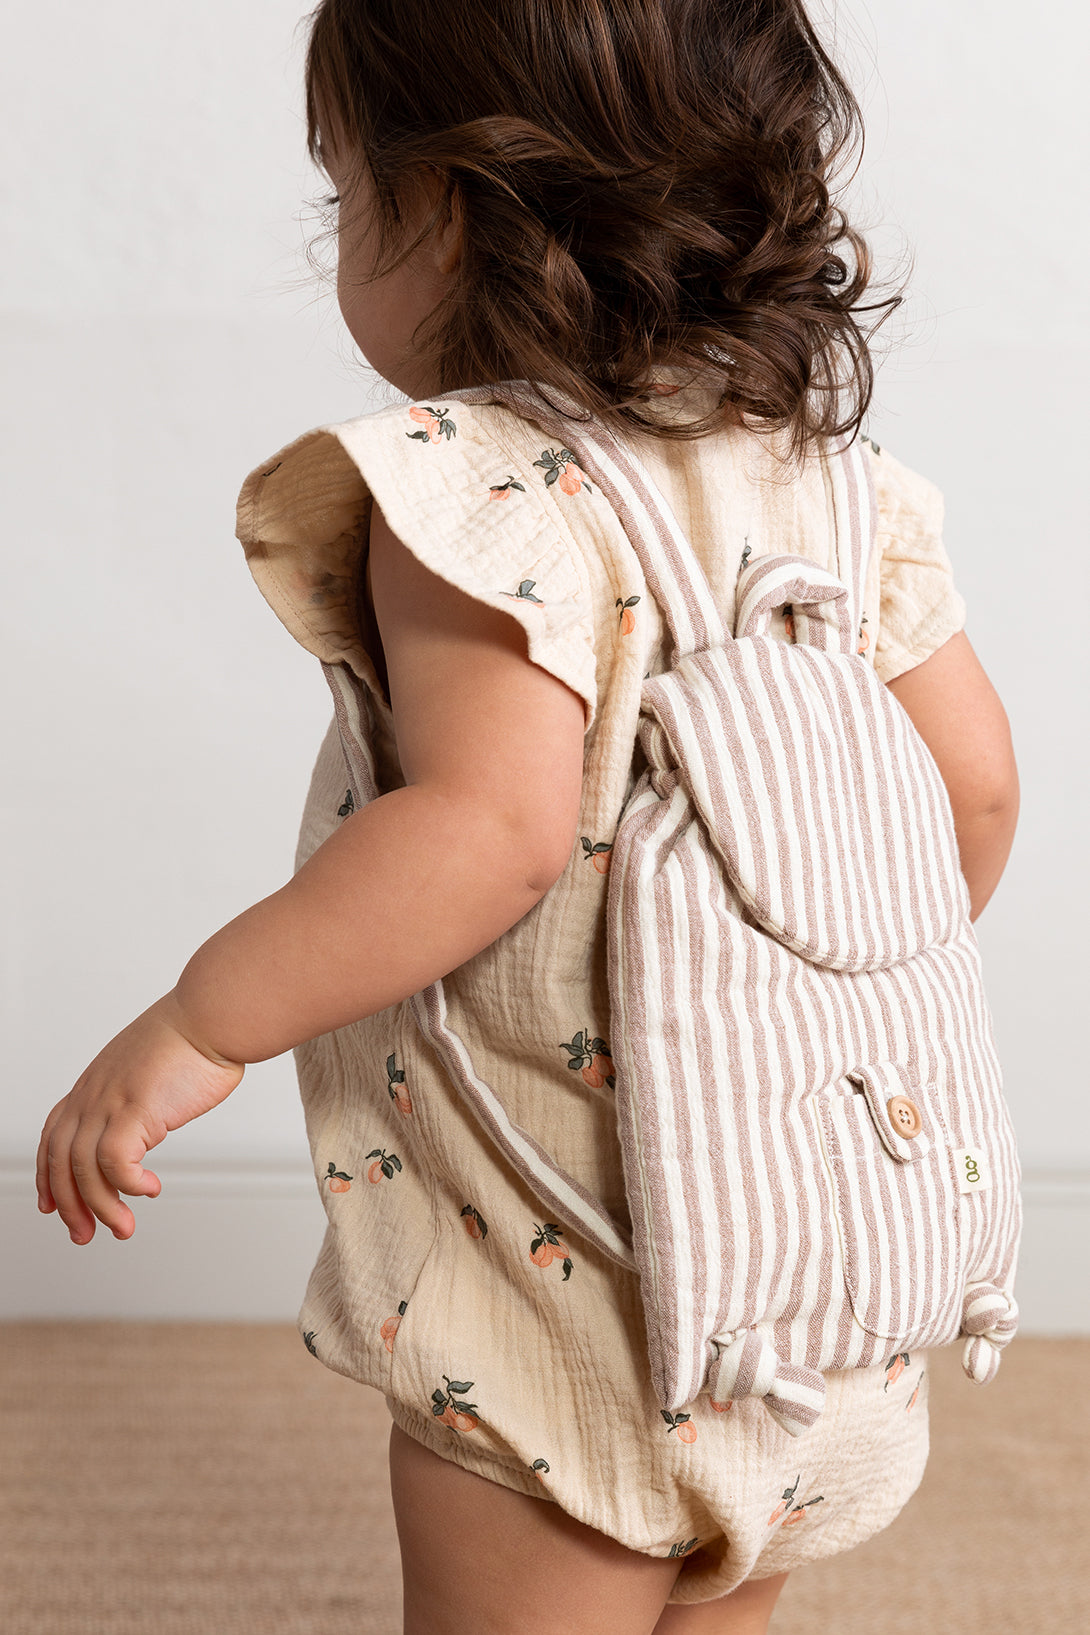 【garbo&friends】【30%OFF】Stripe padded backpack リュックサック  | Coucoubebe/ククベベ